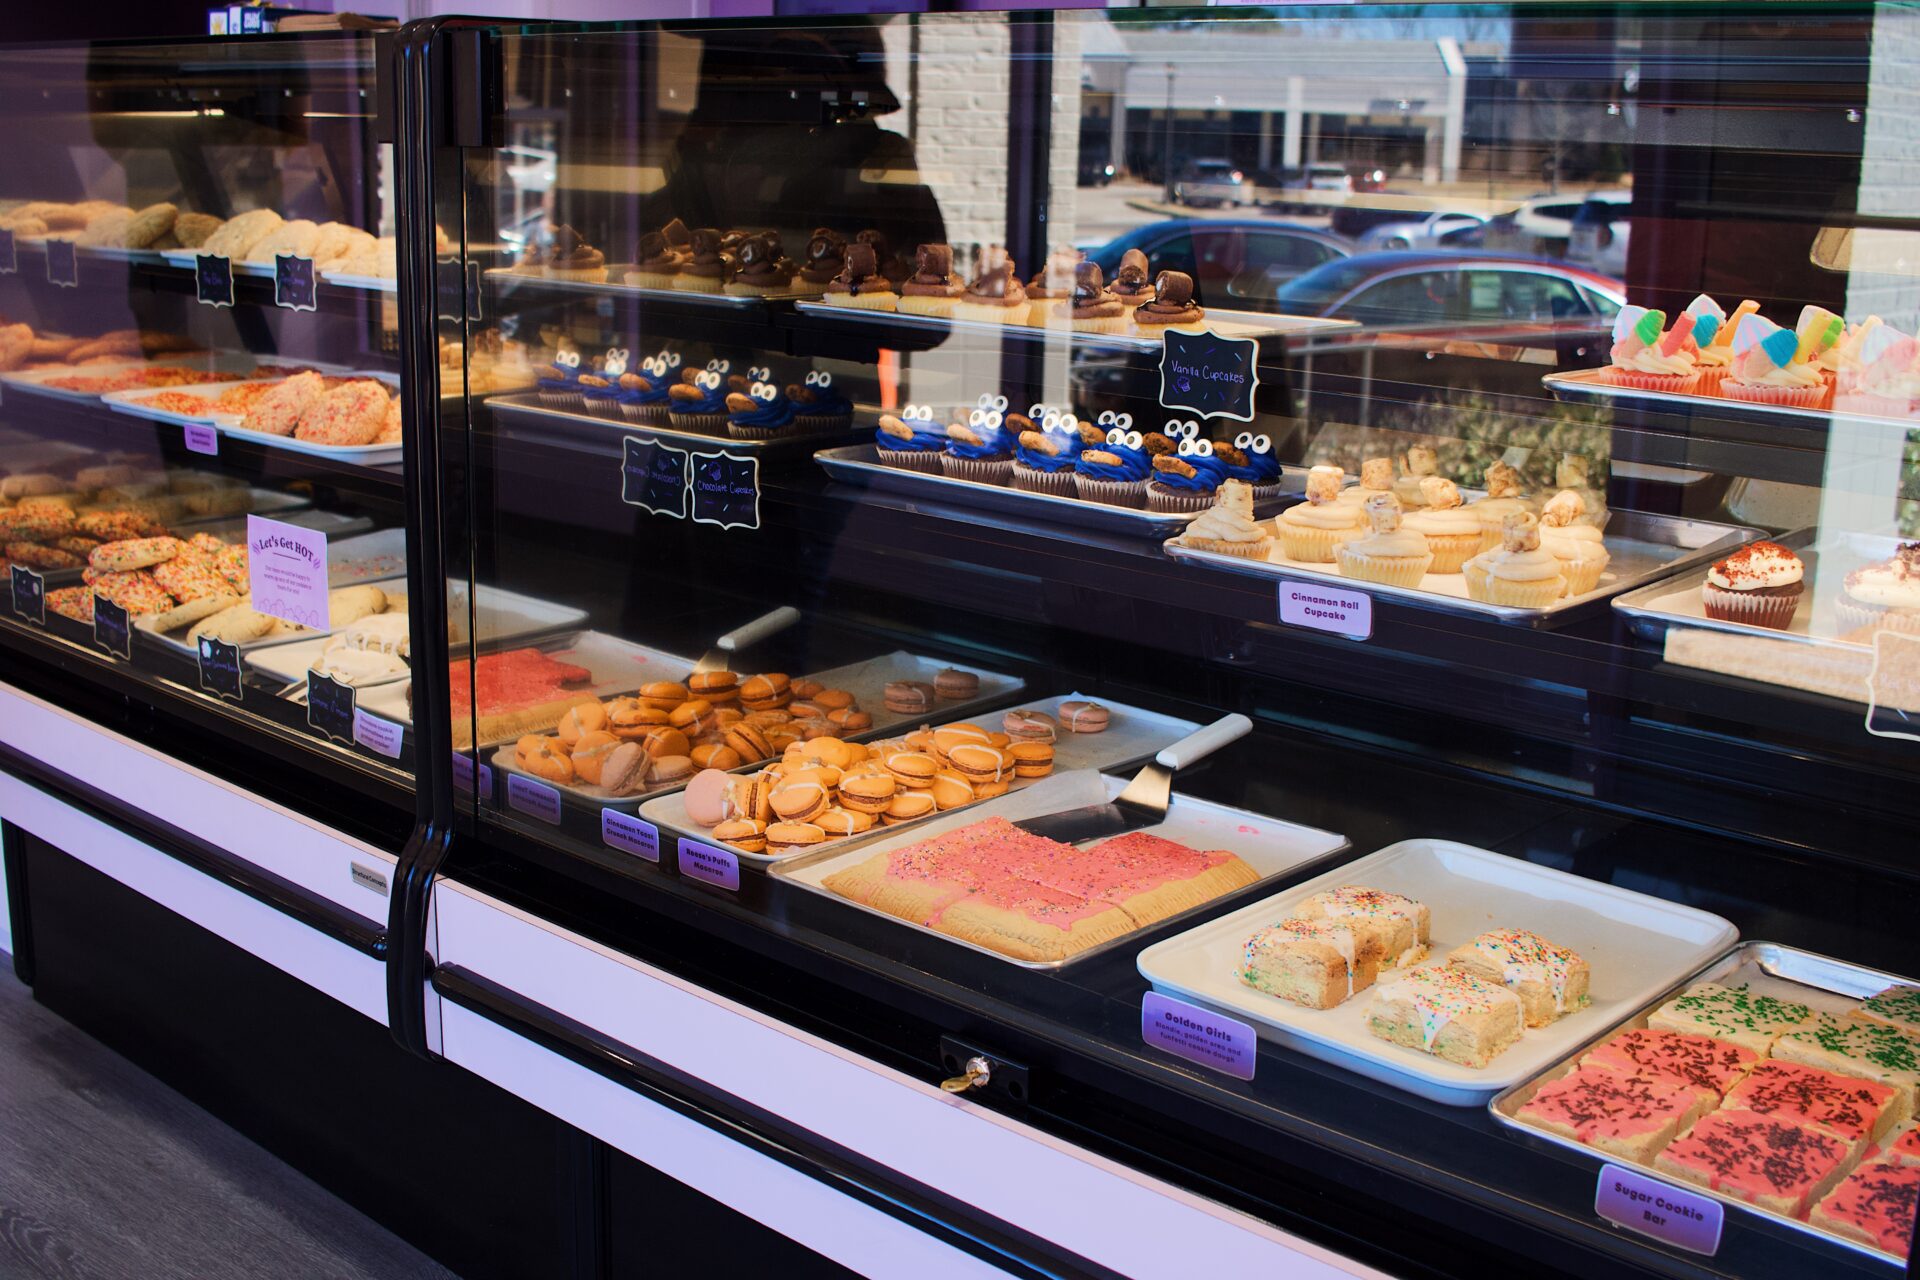 The display case of cookies served at Bluff Cakes Confections, one of 5 new Tennessee Restaurants